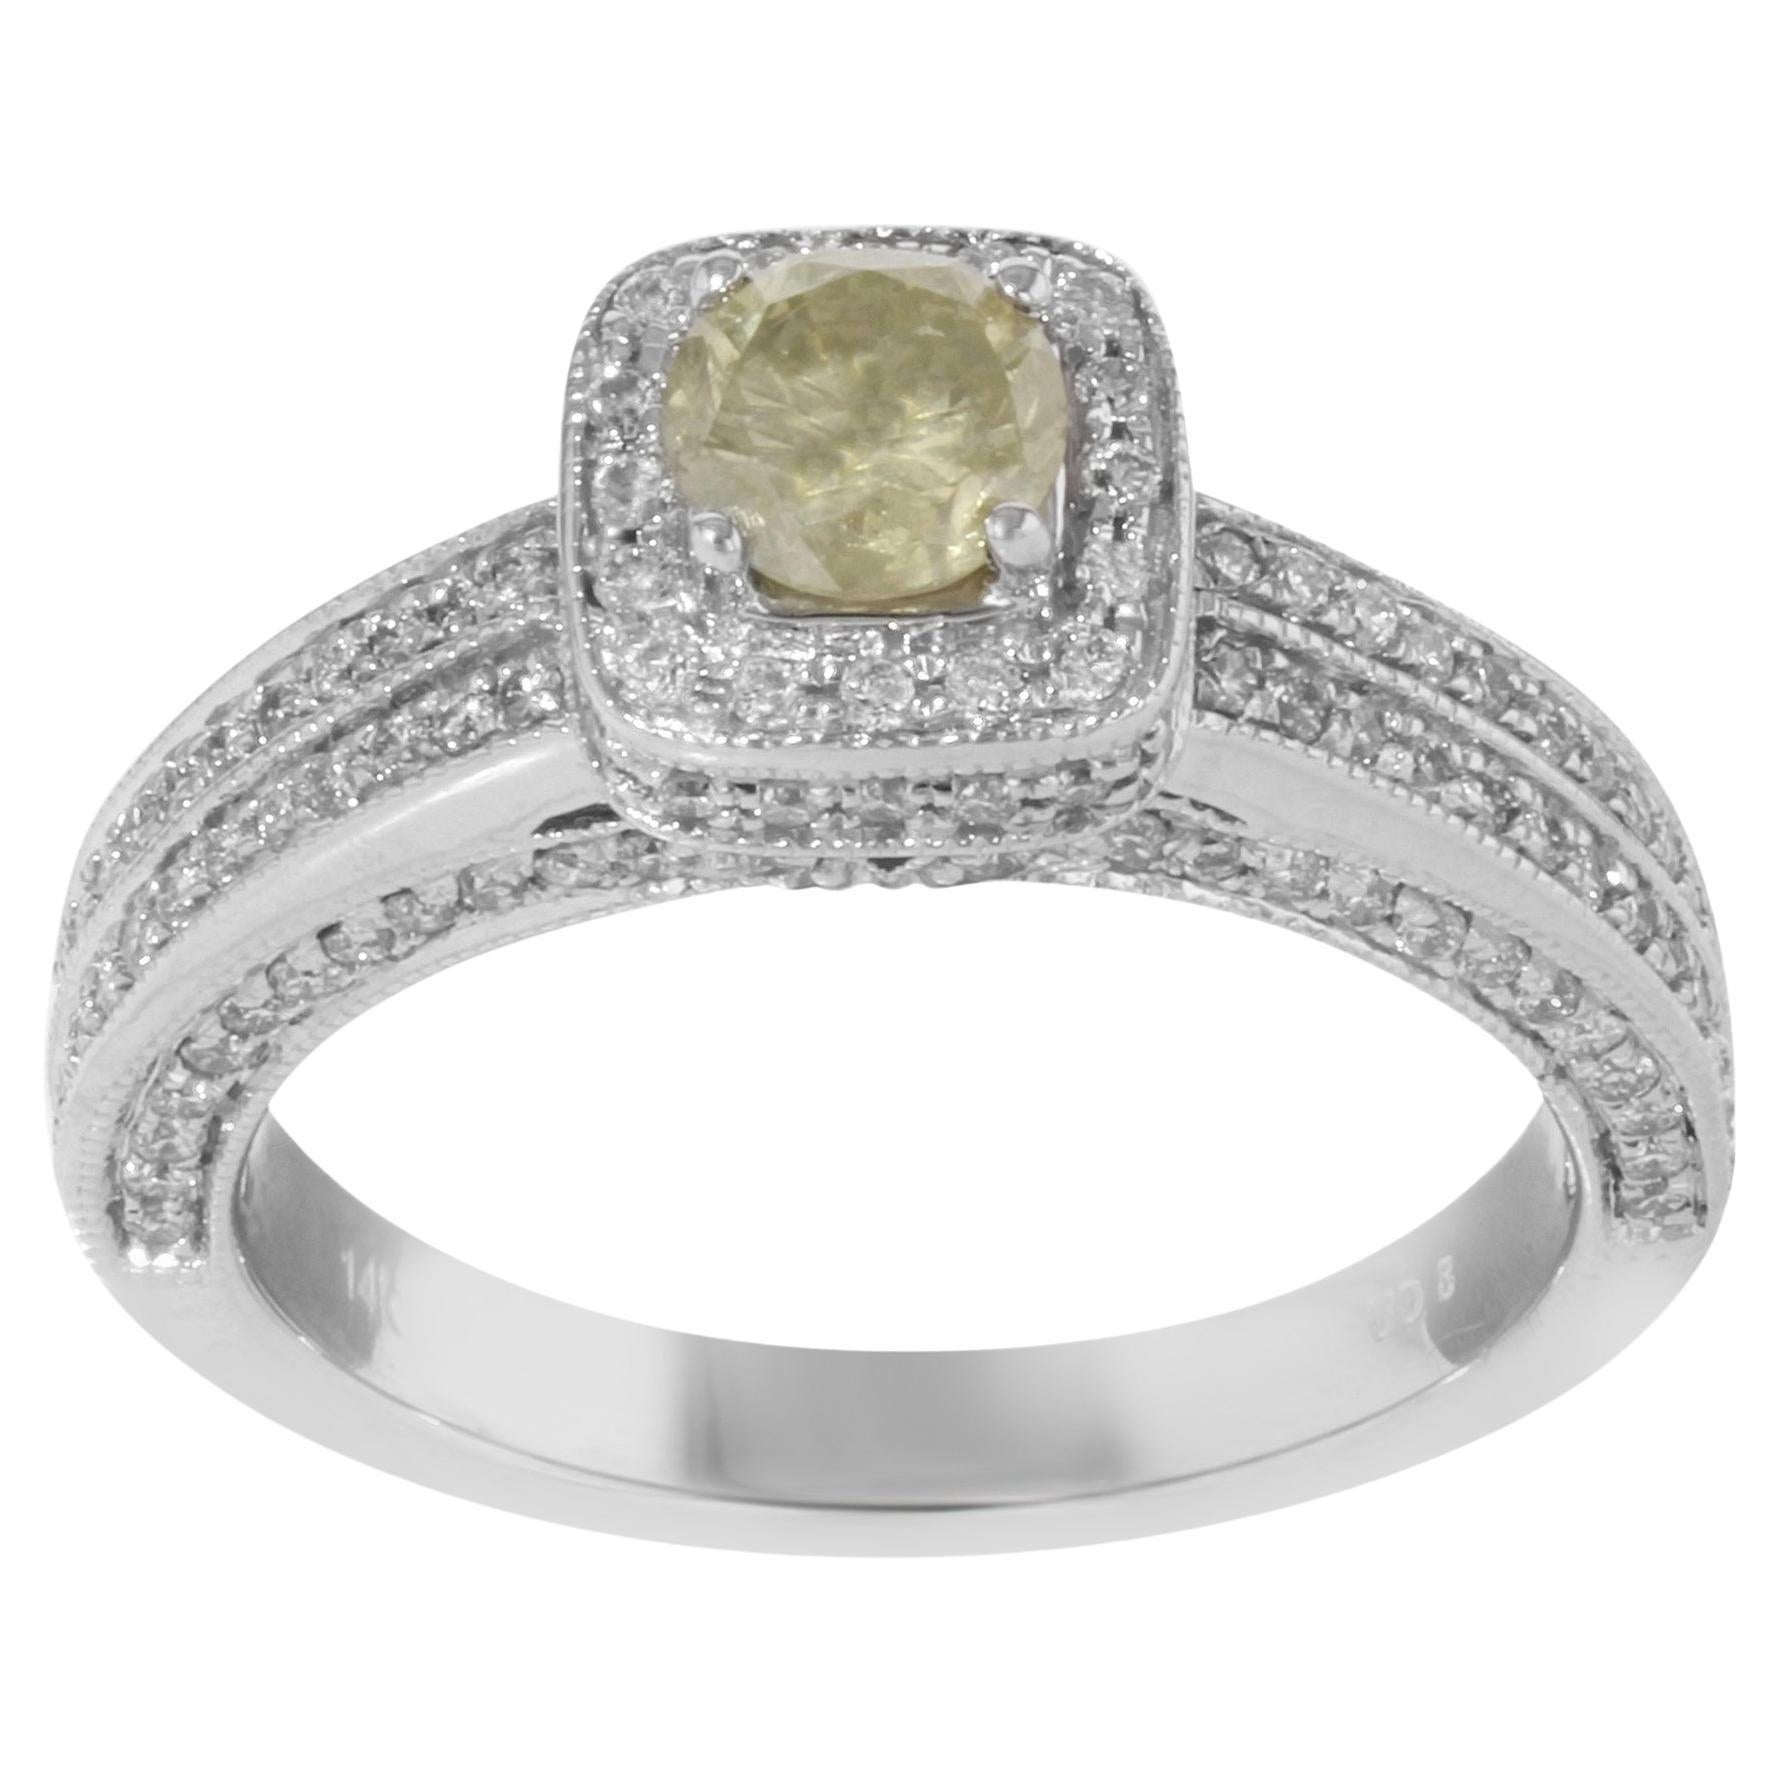 Fancy Yellow Diamond Halo Set Engagement Ring 14K White Gold 1.92 Cttw SZ 7 For Sale